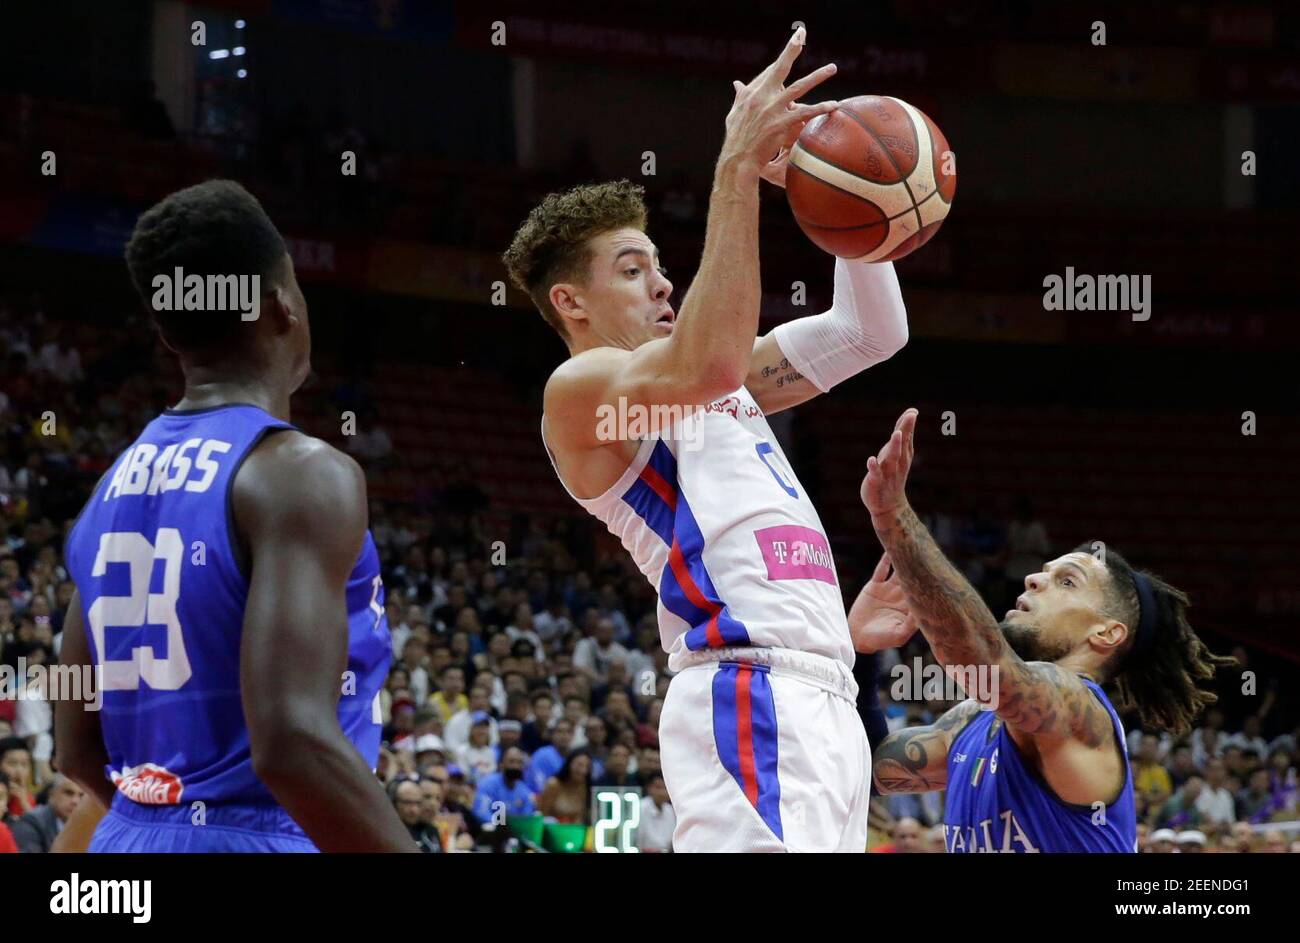 Basketball - FIBA World Cup - Second Round - Group J - Puerto Rico v Italy - Wuhan Sports Centre, Wuhan, China - September 8, 2019 Puerto Rico's Isalah Piniero in action with Italy's Daniel Hackett and Awudu Abass REUTERS/Jason Lee Stock Photo